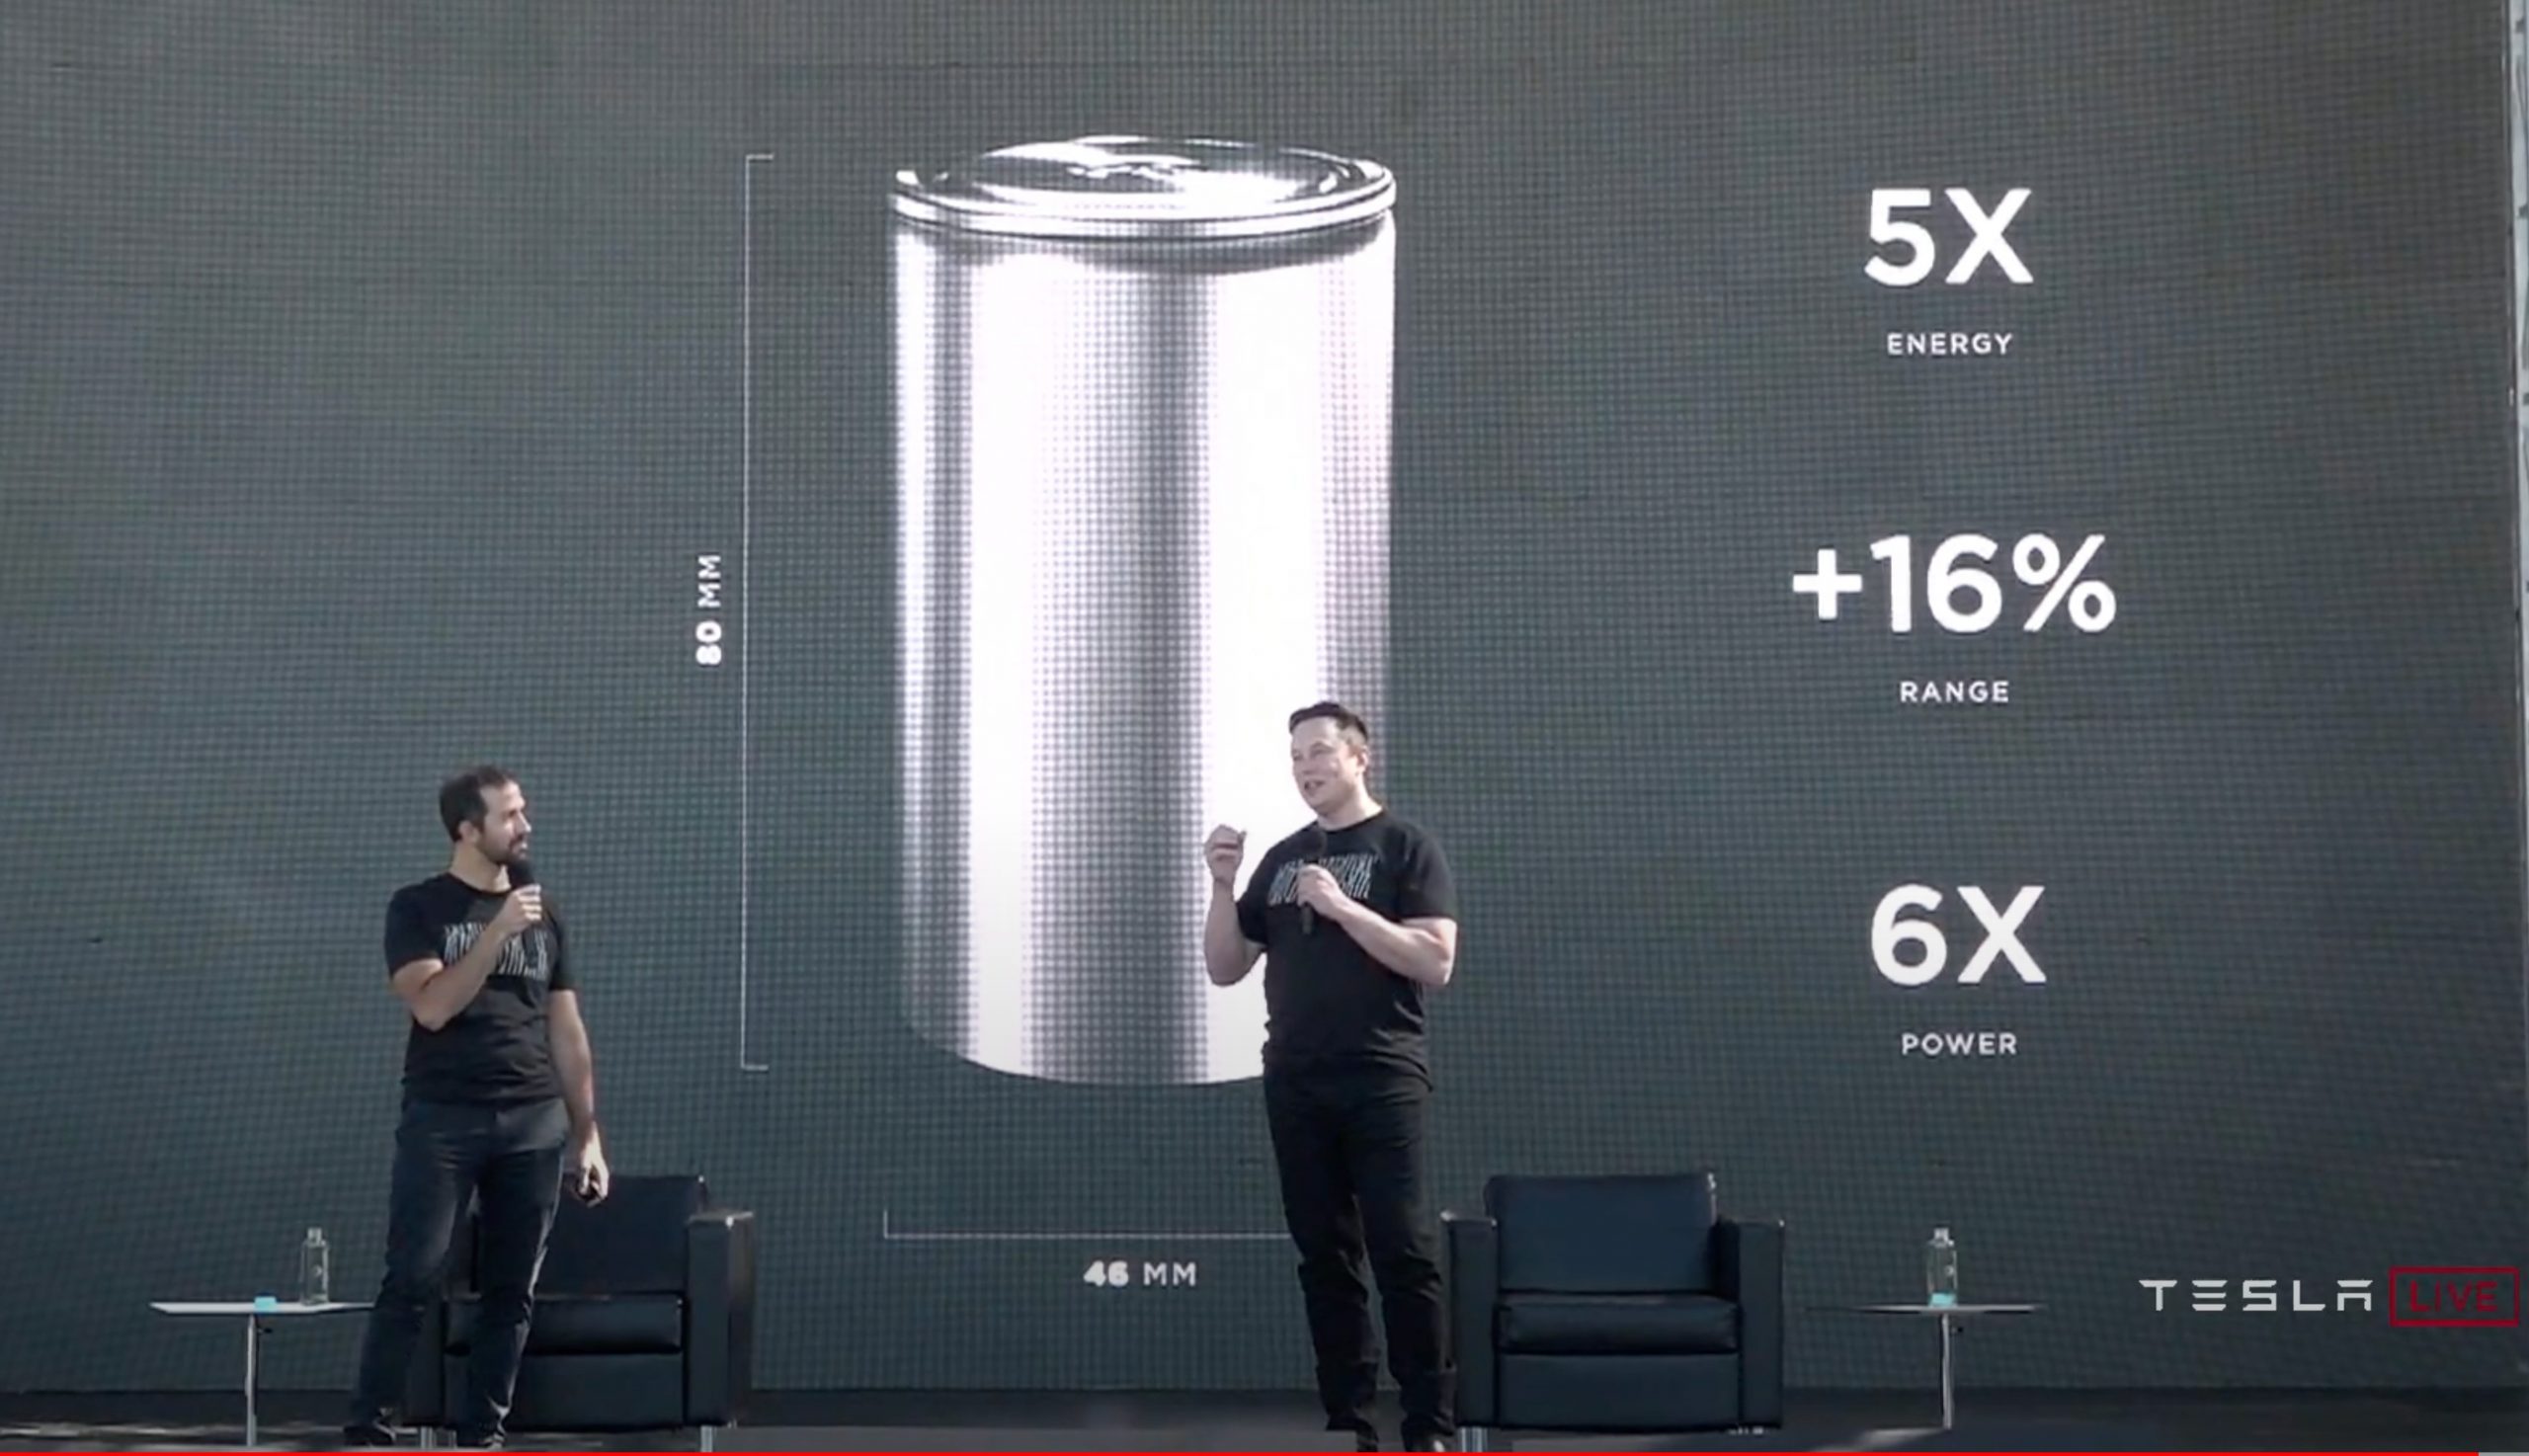 Car batteries typically last anywhere from two to five years, depending on the battery type, climate and vehicle. Teslaâs 4680 tabless cells are curiously similar to LG